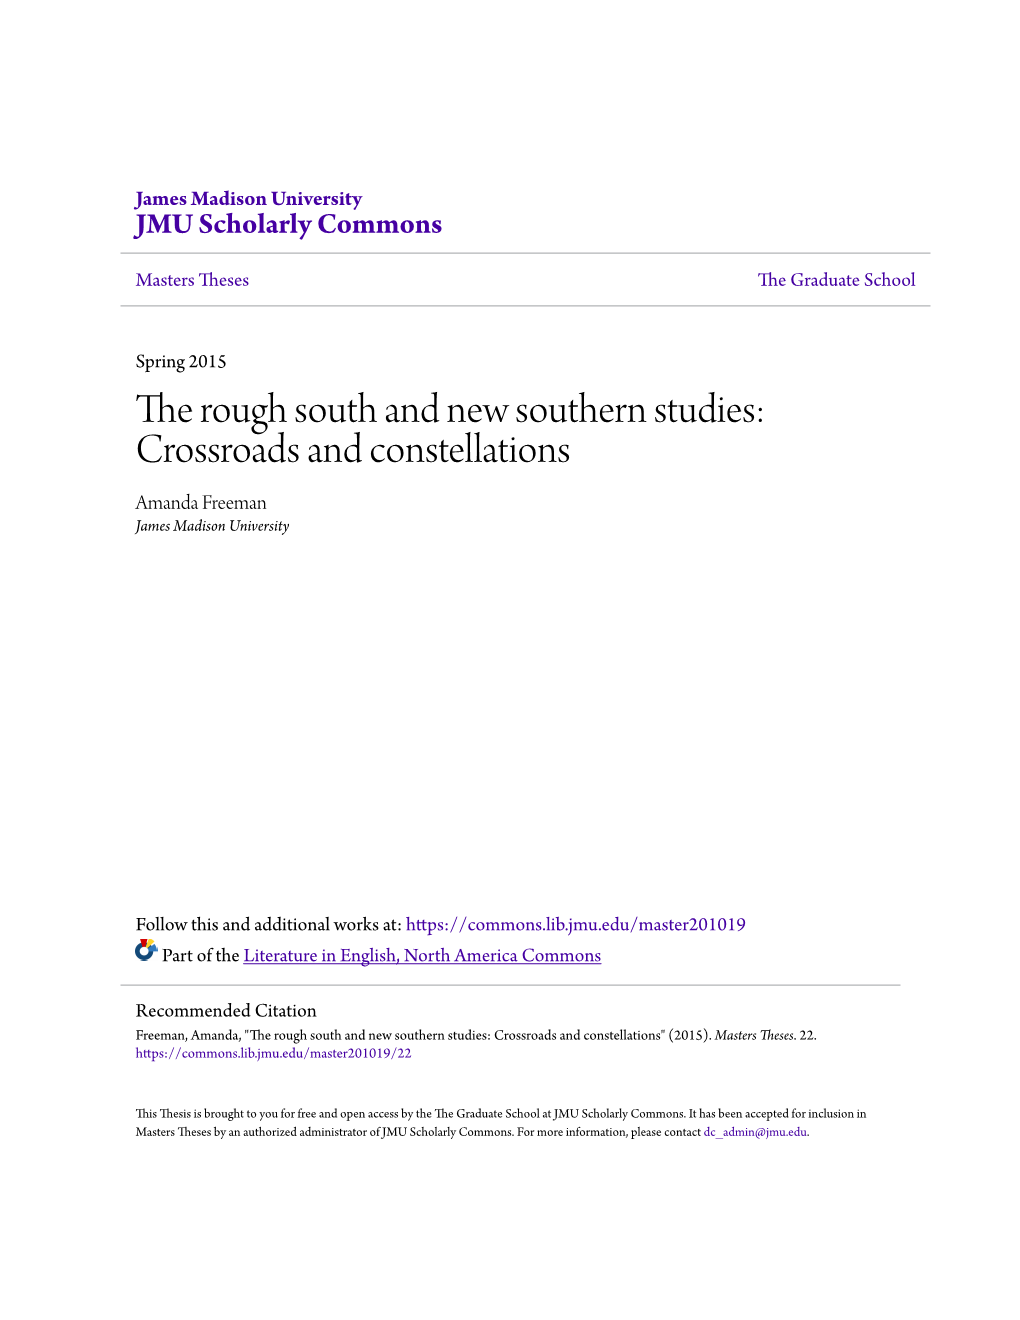 The Rough South and New Southern Studies: Crossroads and Constellations